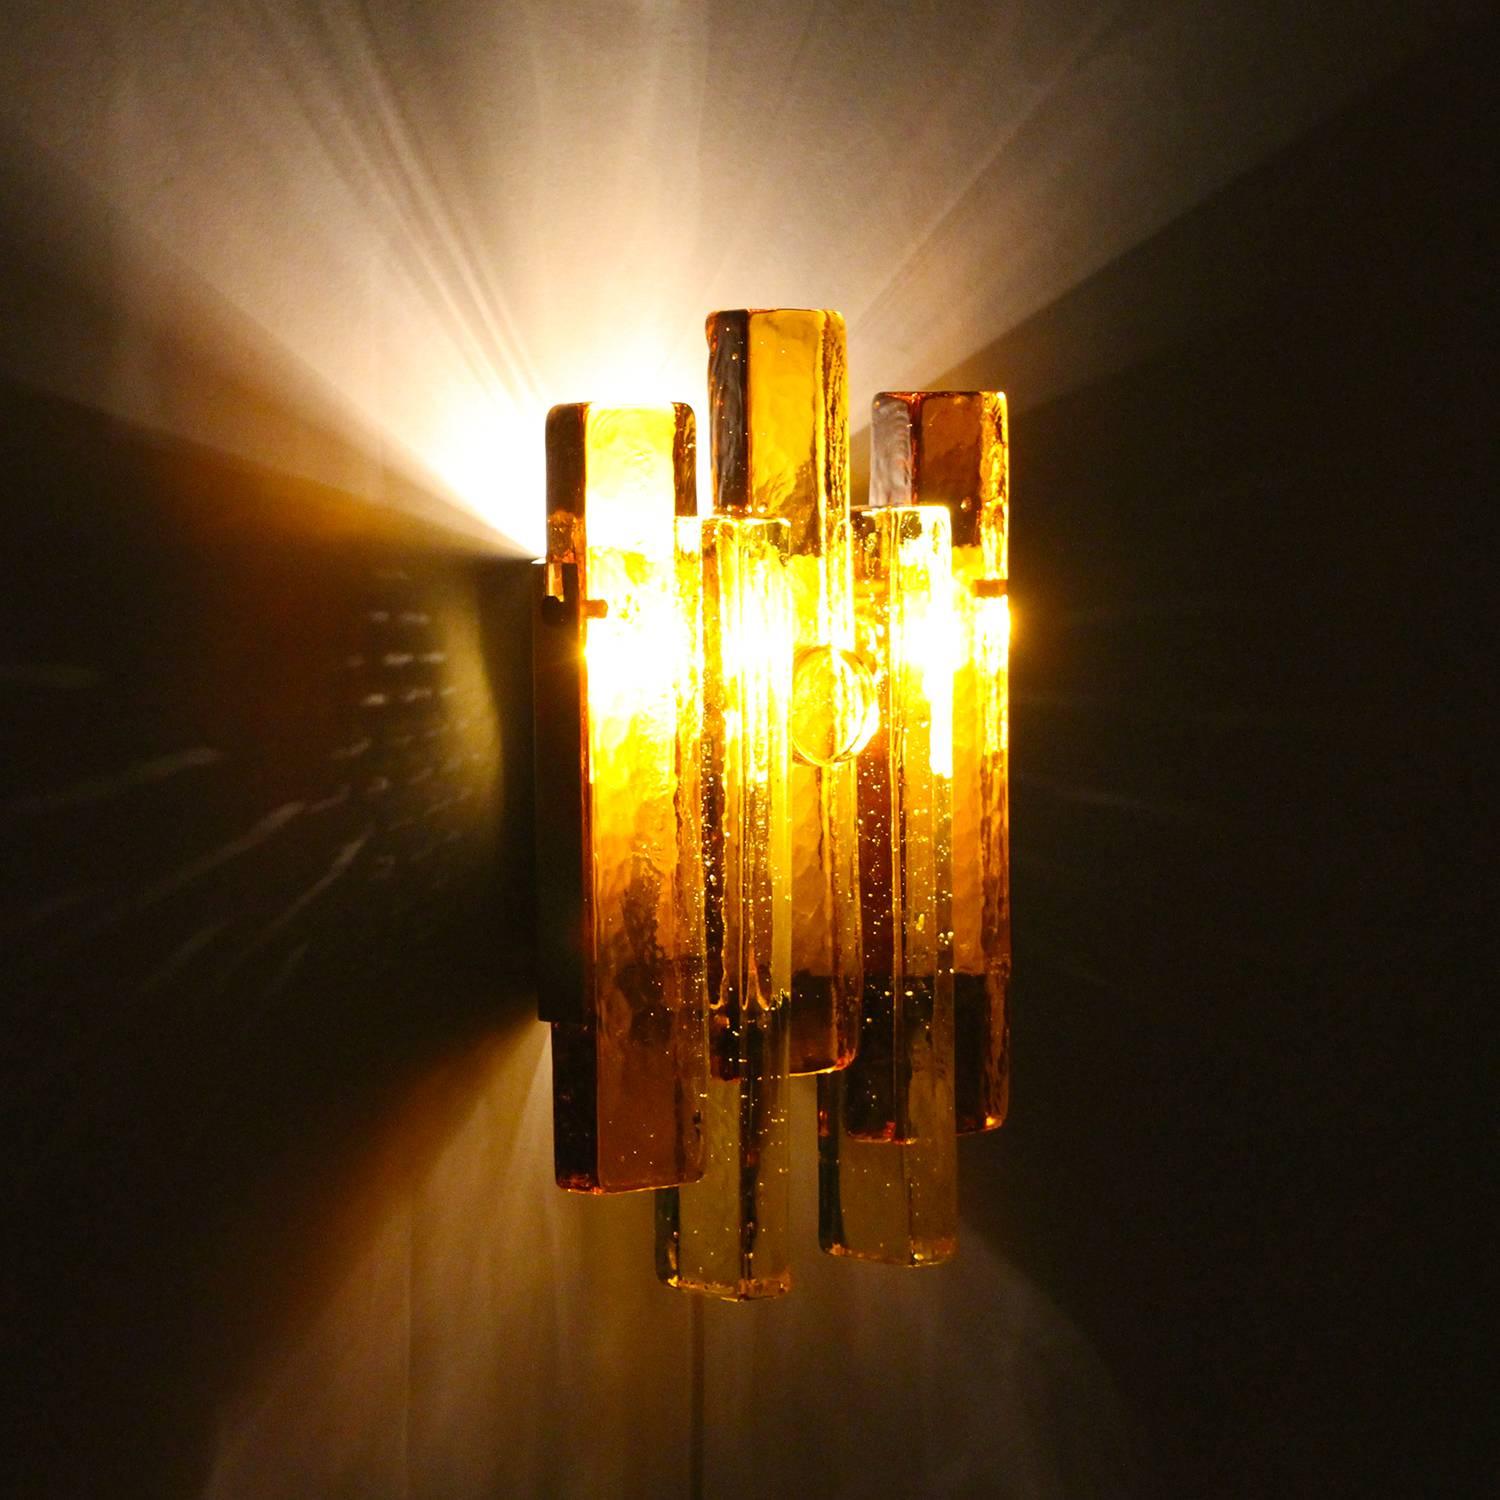 Glass wall light by Hassel & Teudt in the 1960s, Danish Mid-Century Modern amber glass and brass wall lamp in excellent vintage condition.

A beautiful wall lamp, made up of hand molded glass rods, layered and arranged in a rectangular design and